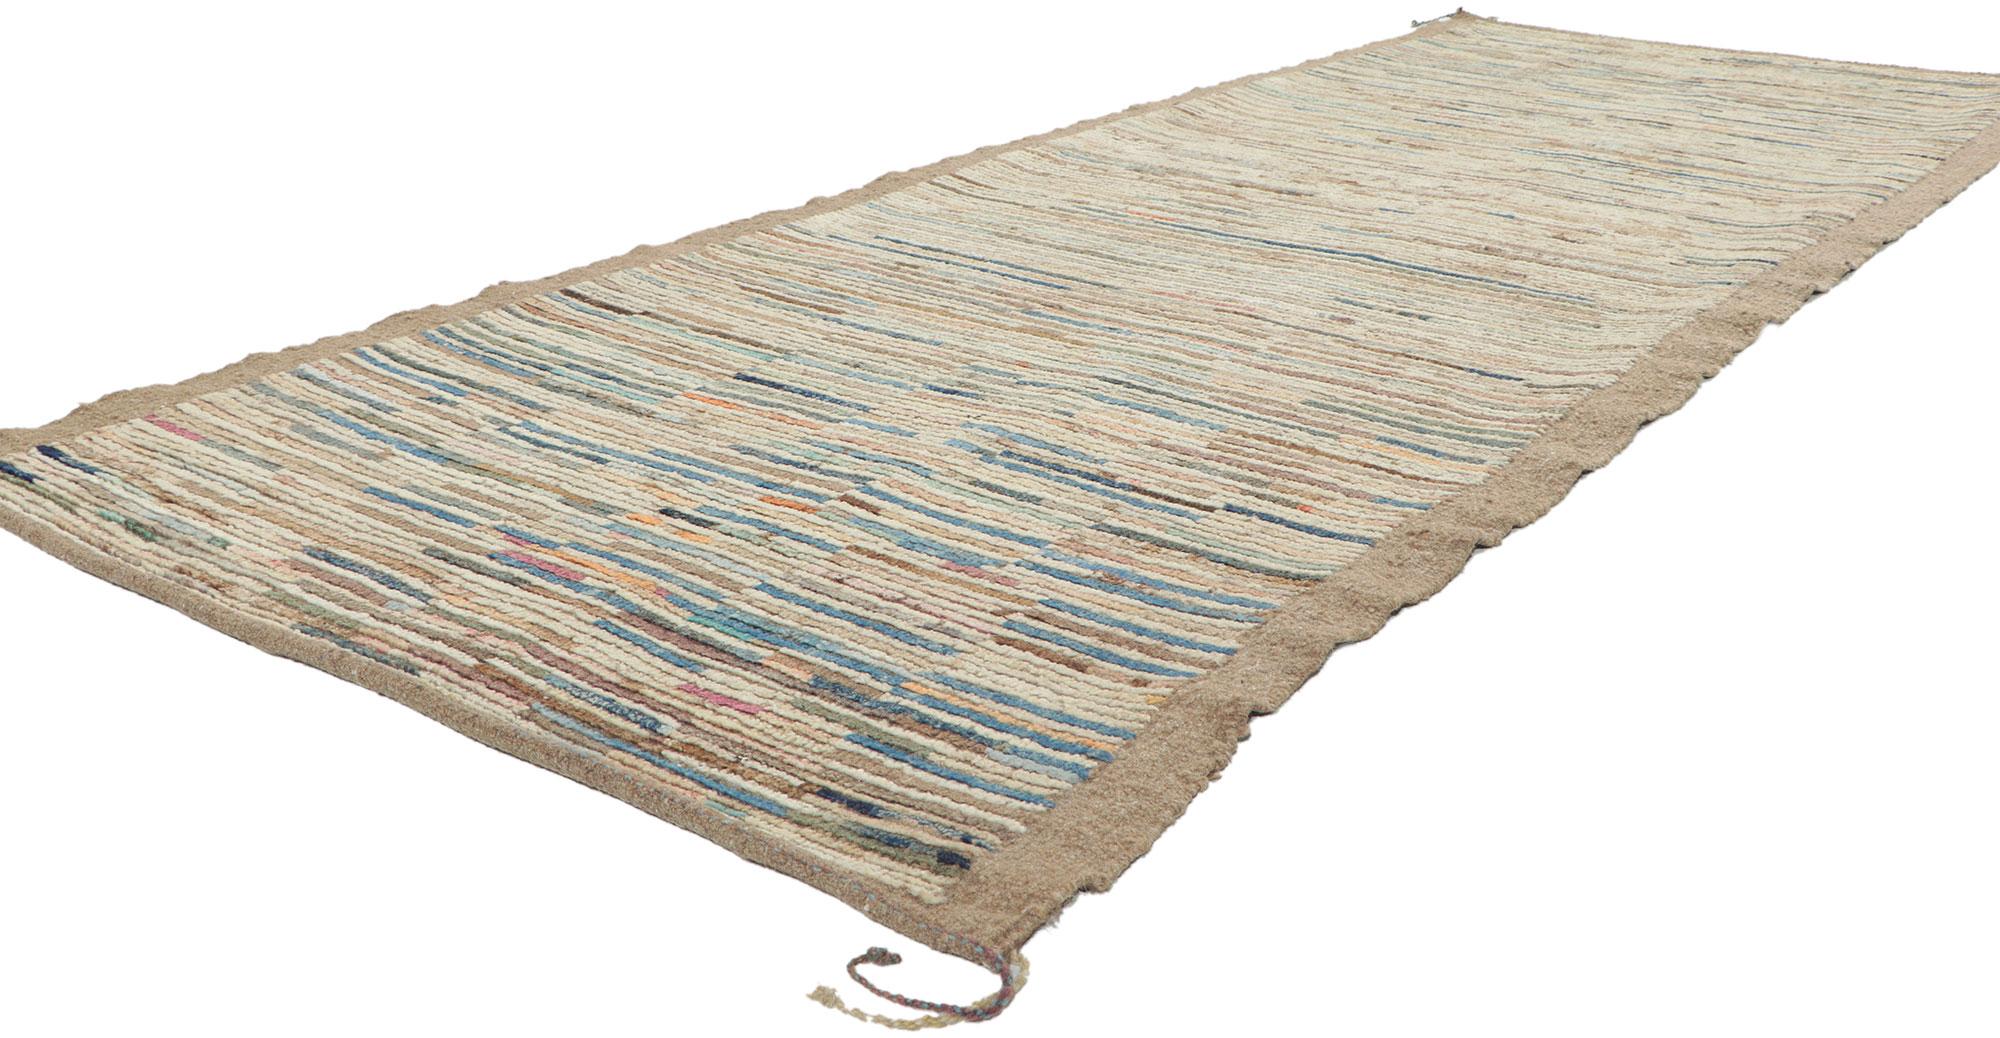 80759 New Contemporary Moroccan runner with Modern Style, 03'05 x 09'03. With its subtle graphic appeal, incredible detail and texture, this hand knotted wool contemporary Moroccan runner is a captivating vision of woven beauty. The modernistic